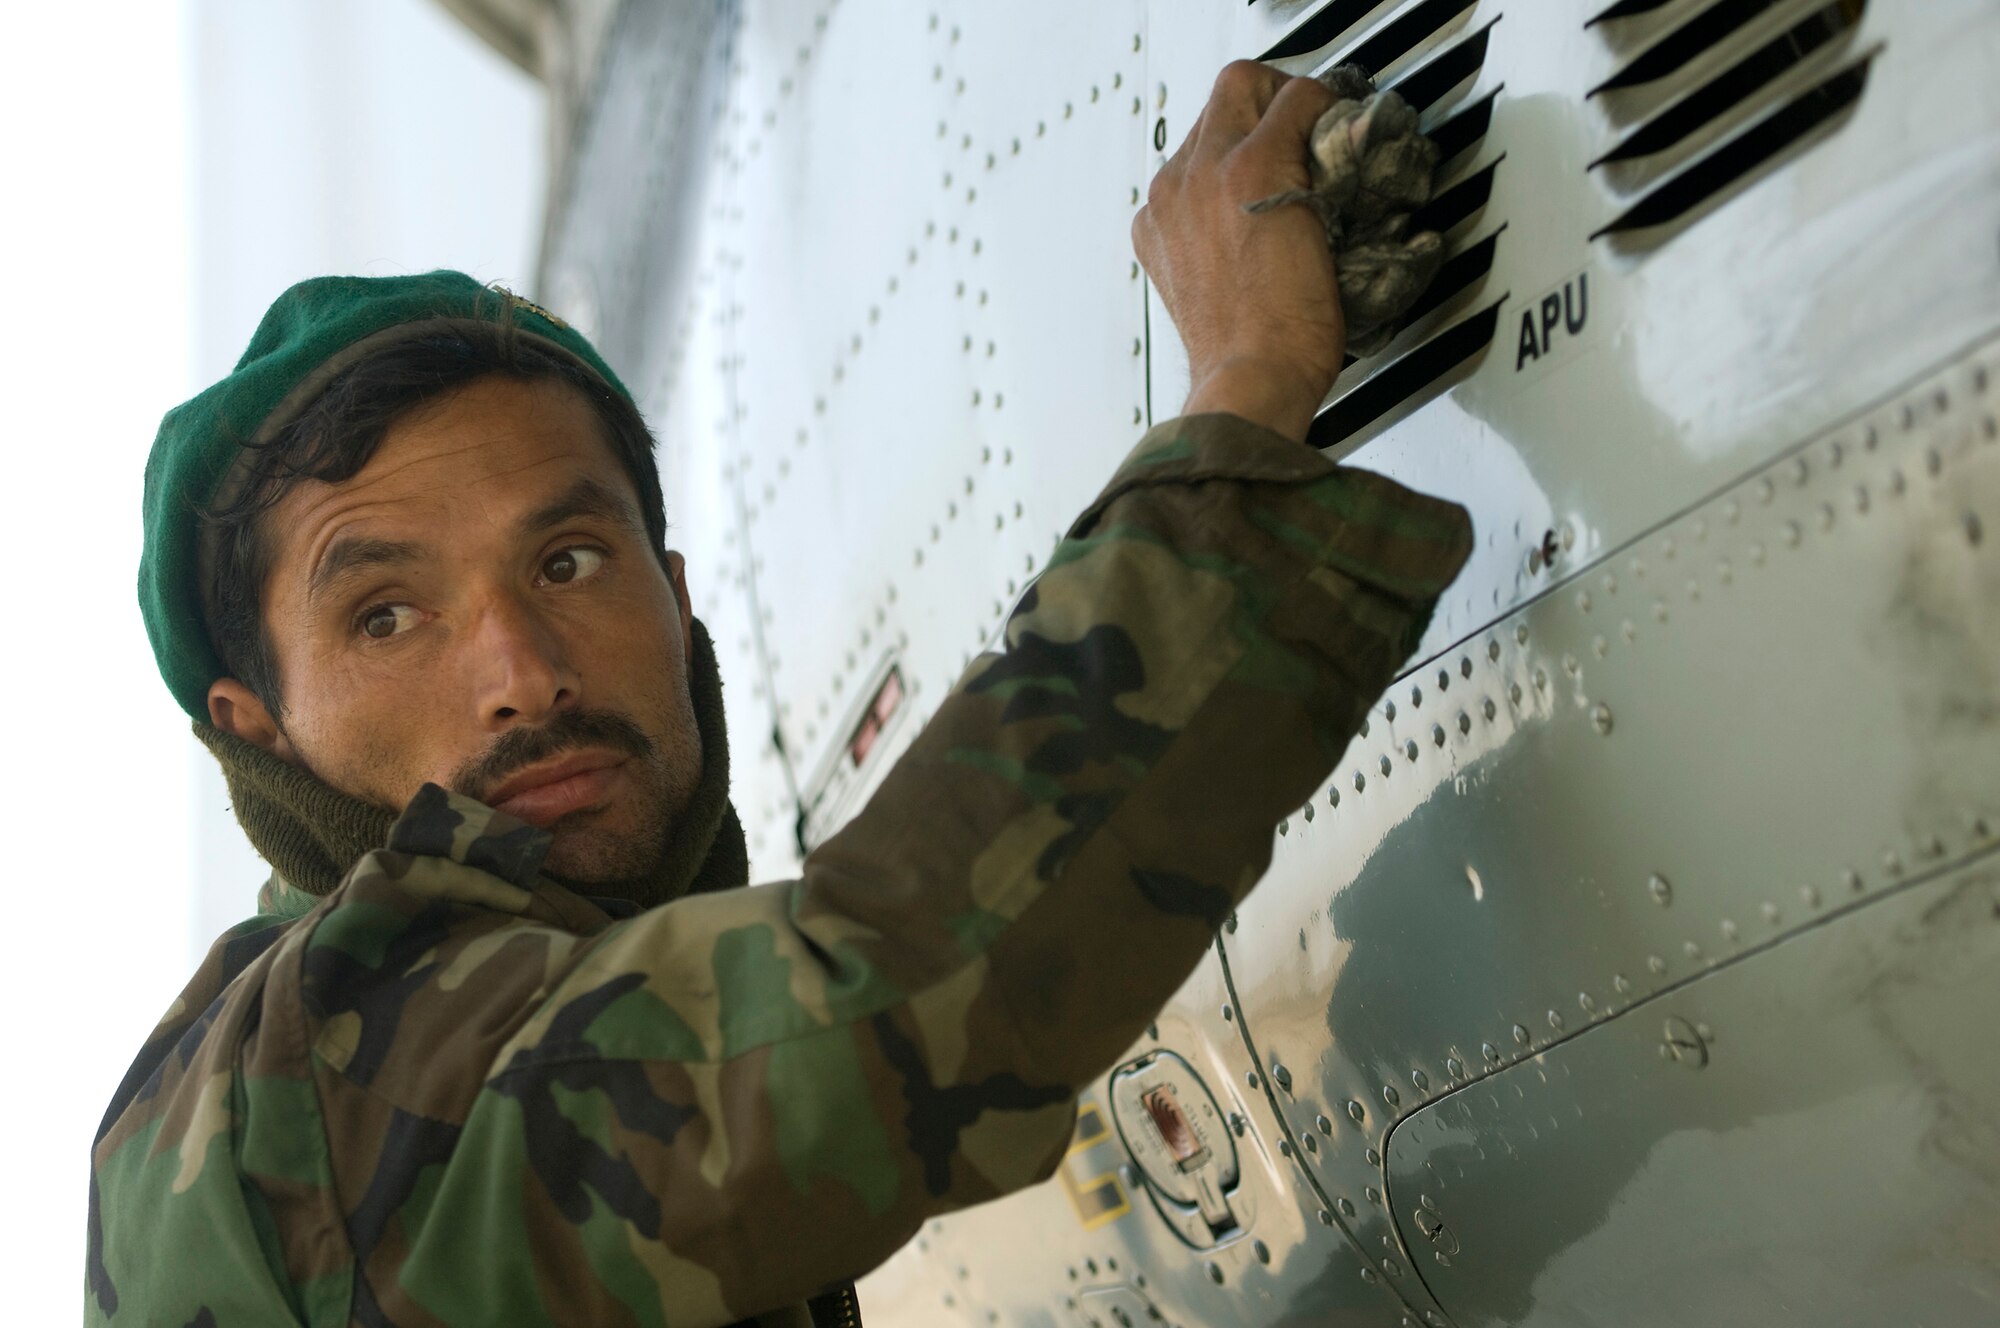 KABUL, Afghanistan -- Afghan National Army Air Corps An-26 crew chief cleans the aircraft after a mission here. The ANAAC is being mentored in western methodologies of flying operations by members of the 438th Air Expeditionary Wing. 
The force has made tremendous strides in the last year. The ANAAC went from flying 10 percent of Afghan support missions to 90 percent. (U.S. Air Force photo/Master Sgt. Keith Brown)